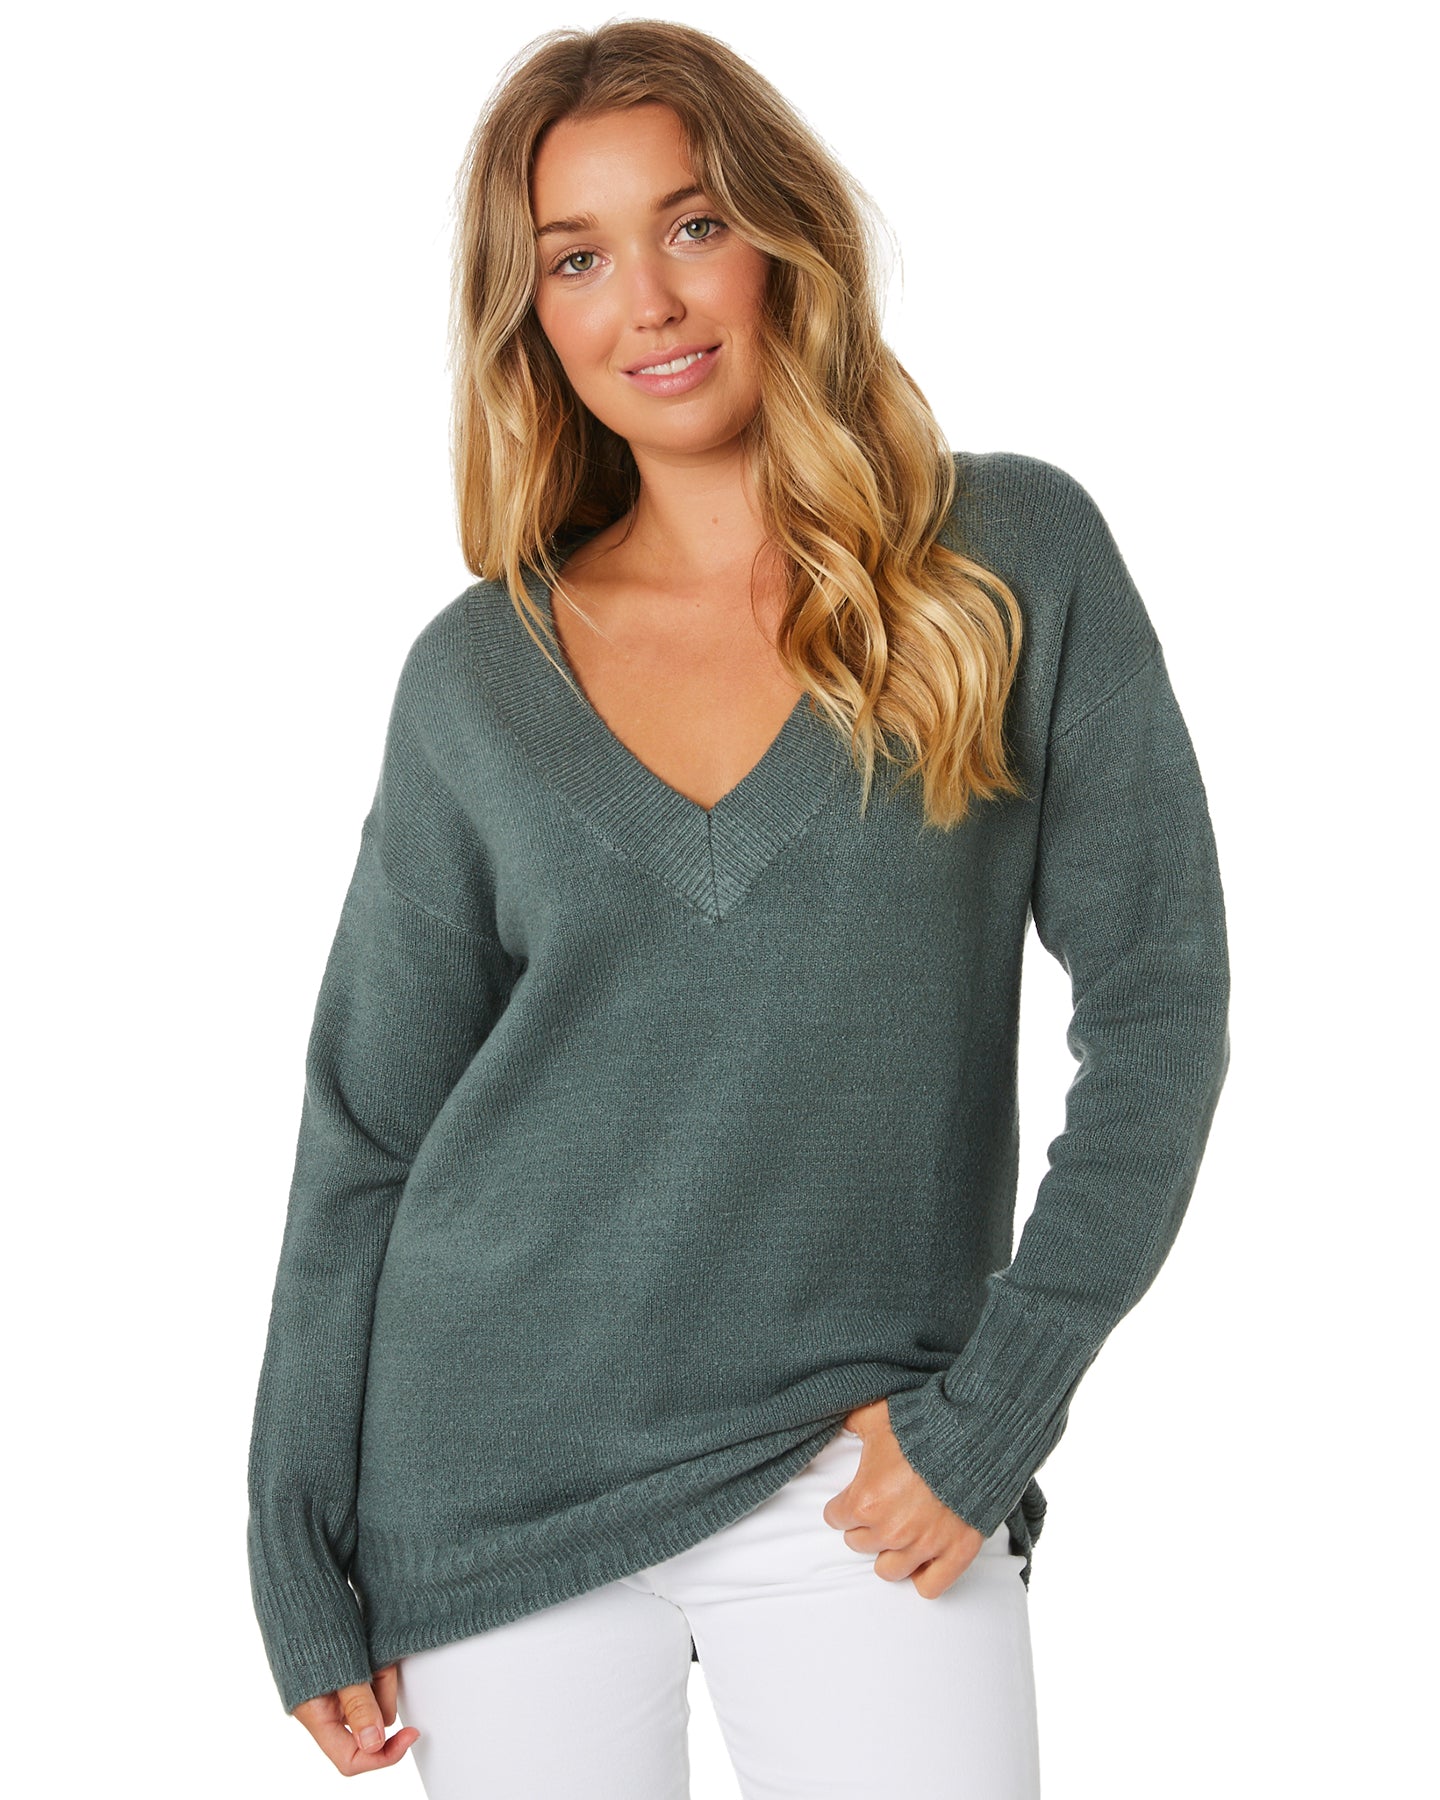 Rusty Together Vee Nick Knit Sweater EVG-Evergreen S